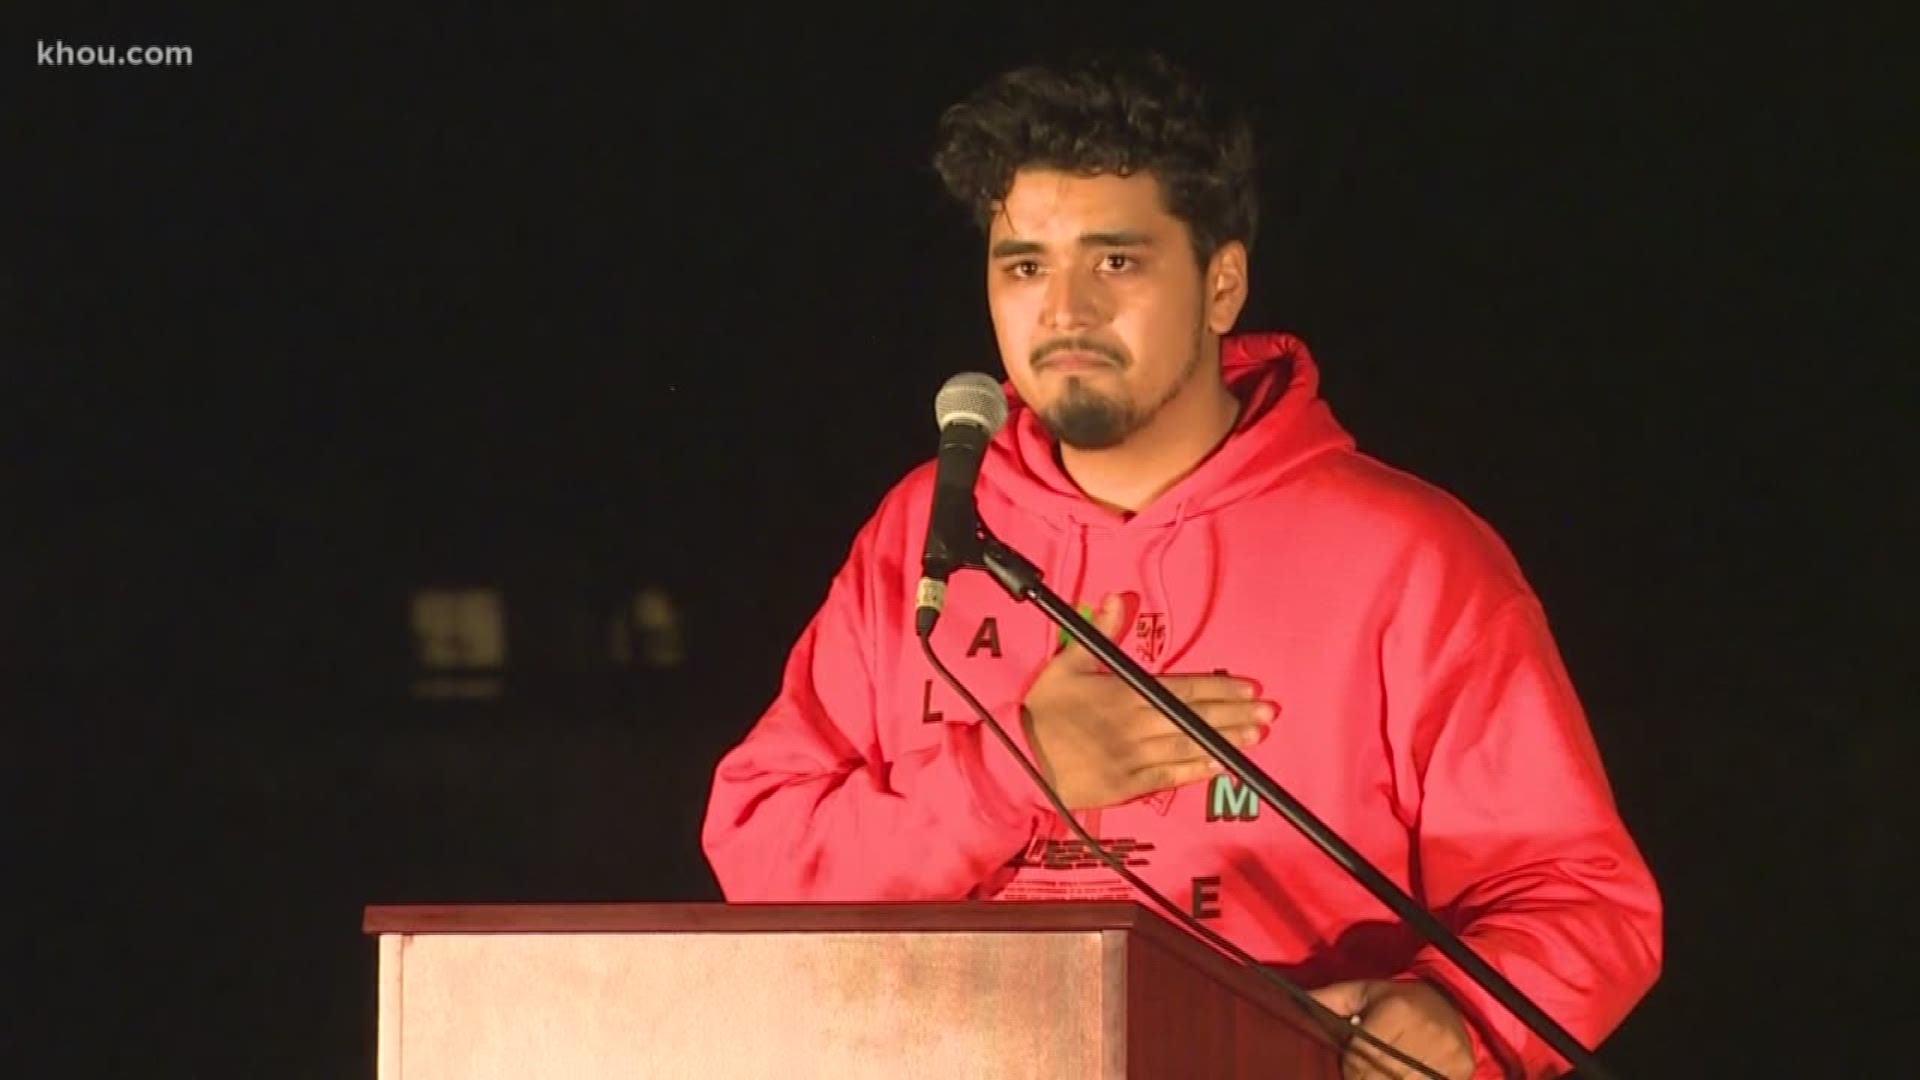 The brother of the student who was killed during a shooting at Bellaire High School on Tuesday, spoke publicly for the first time during a candlelight vigil.